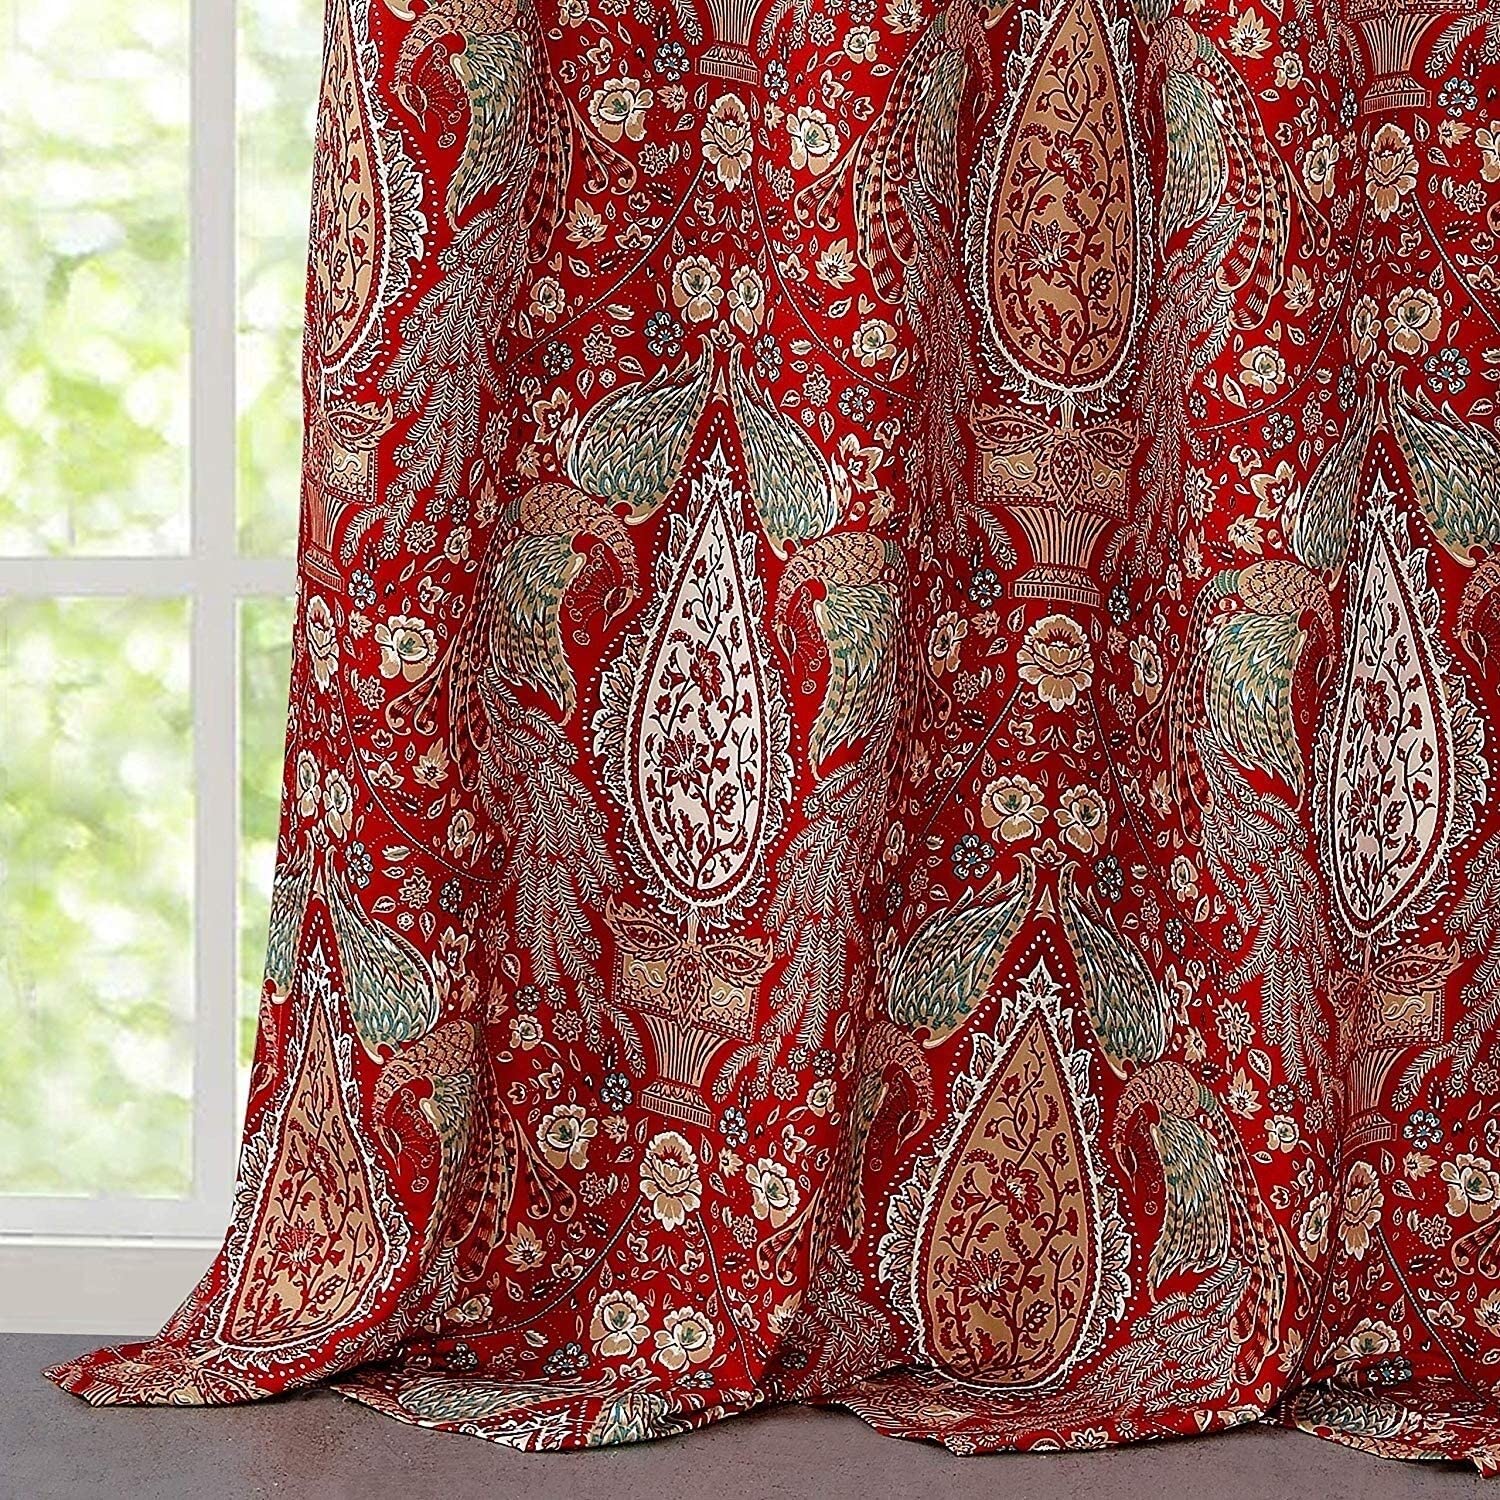 MISC Peacock Floral Pattern Blackout Window Curtain Grommet 2 Layers Panels 52' Width X 84' Length Red Animal French Country Polyester Thermal